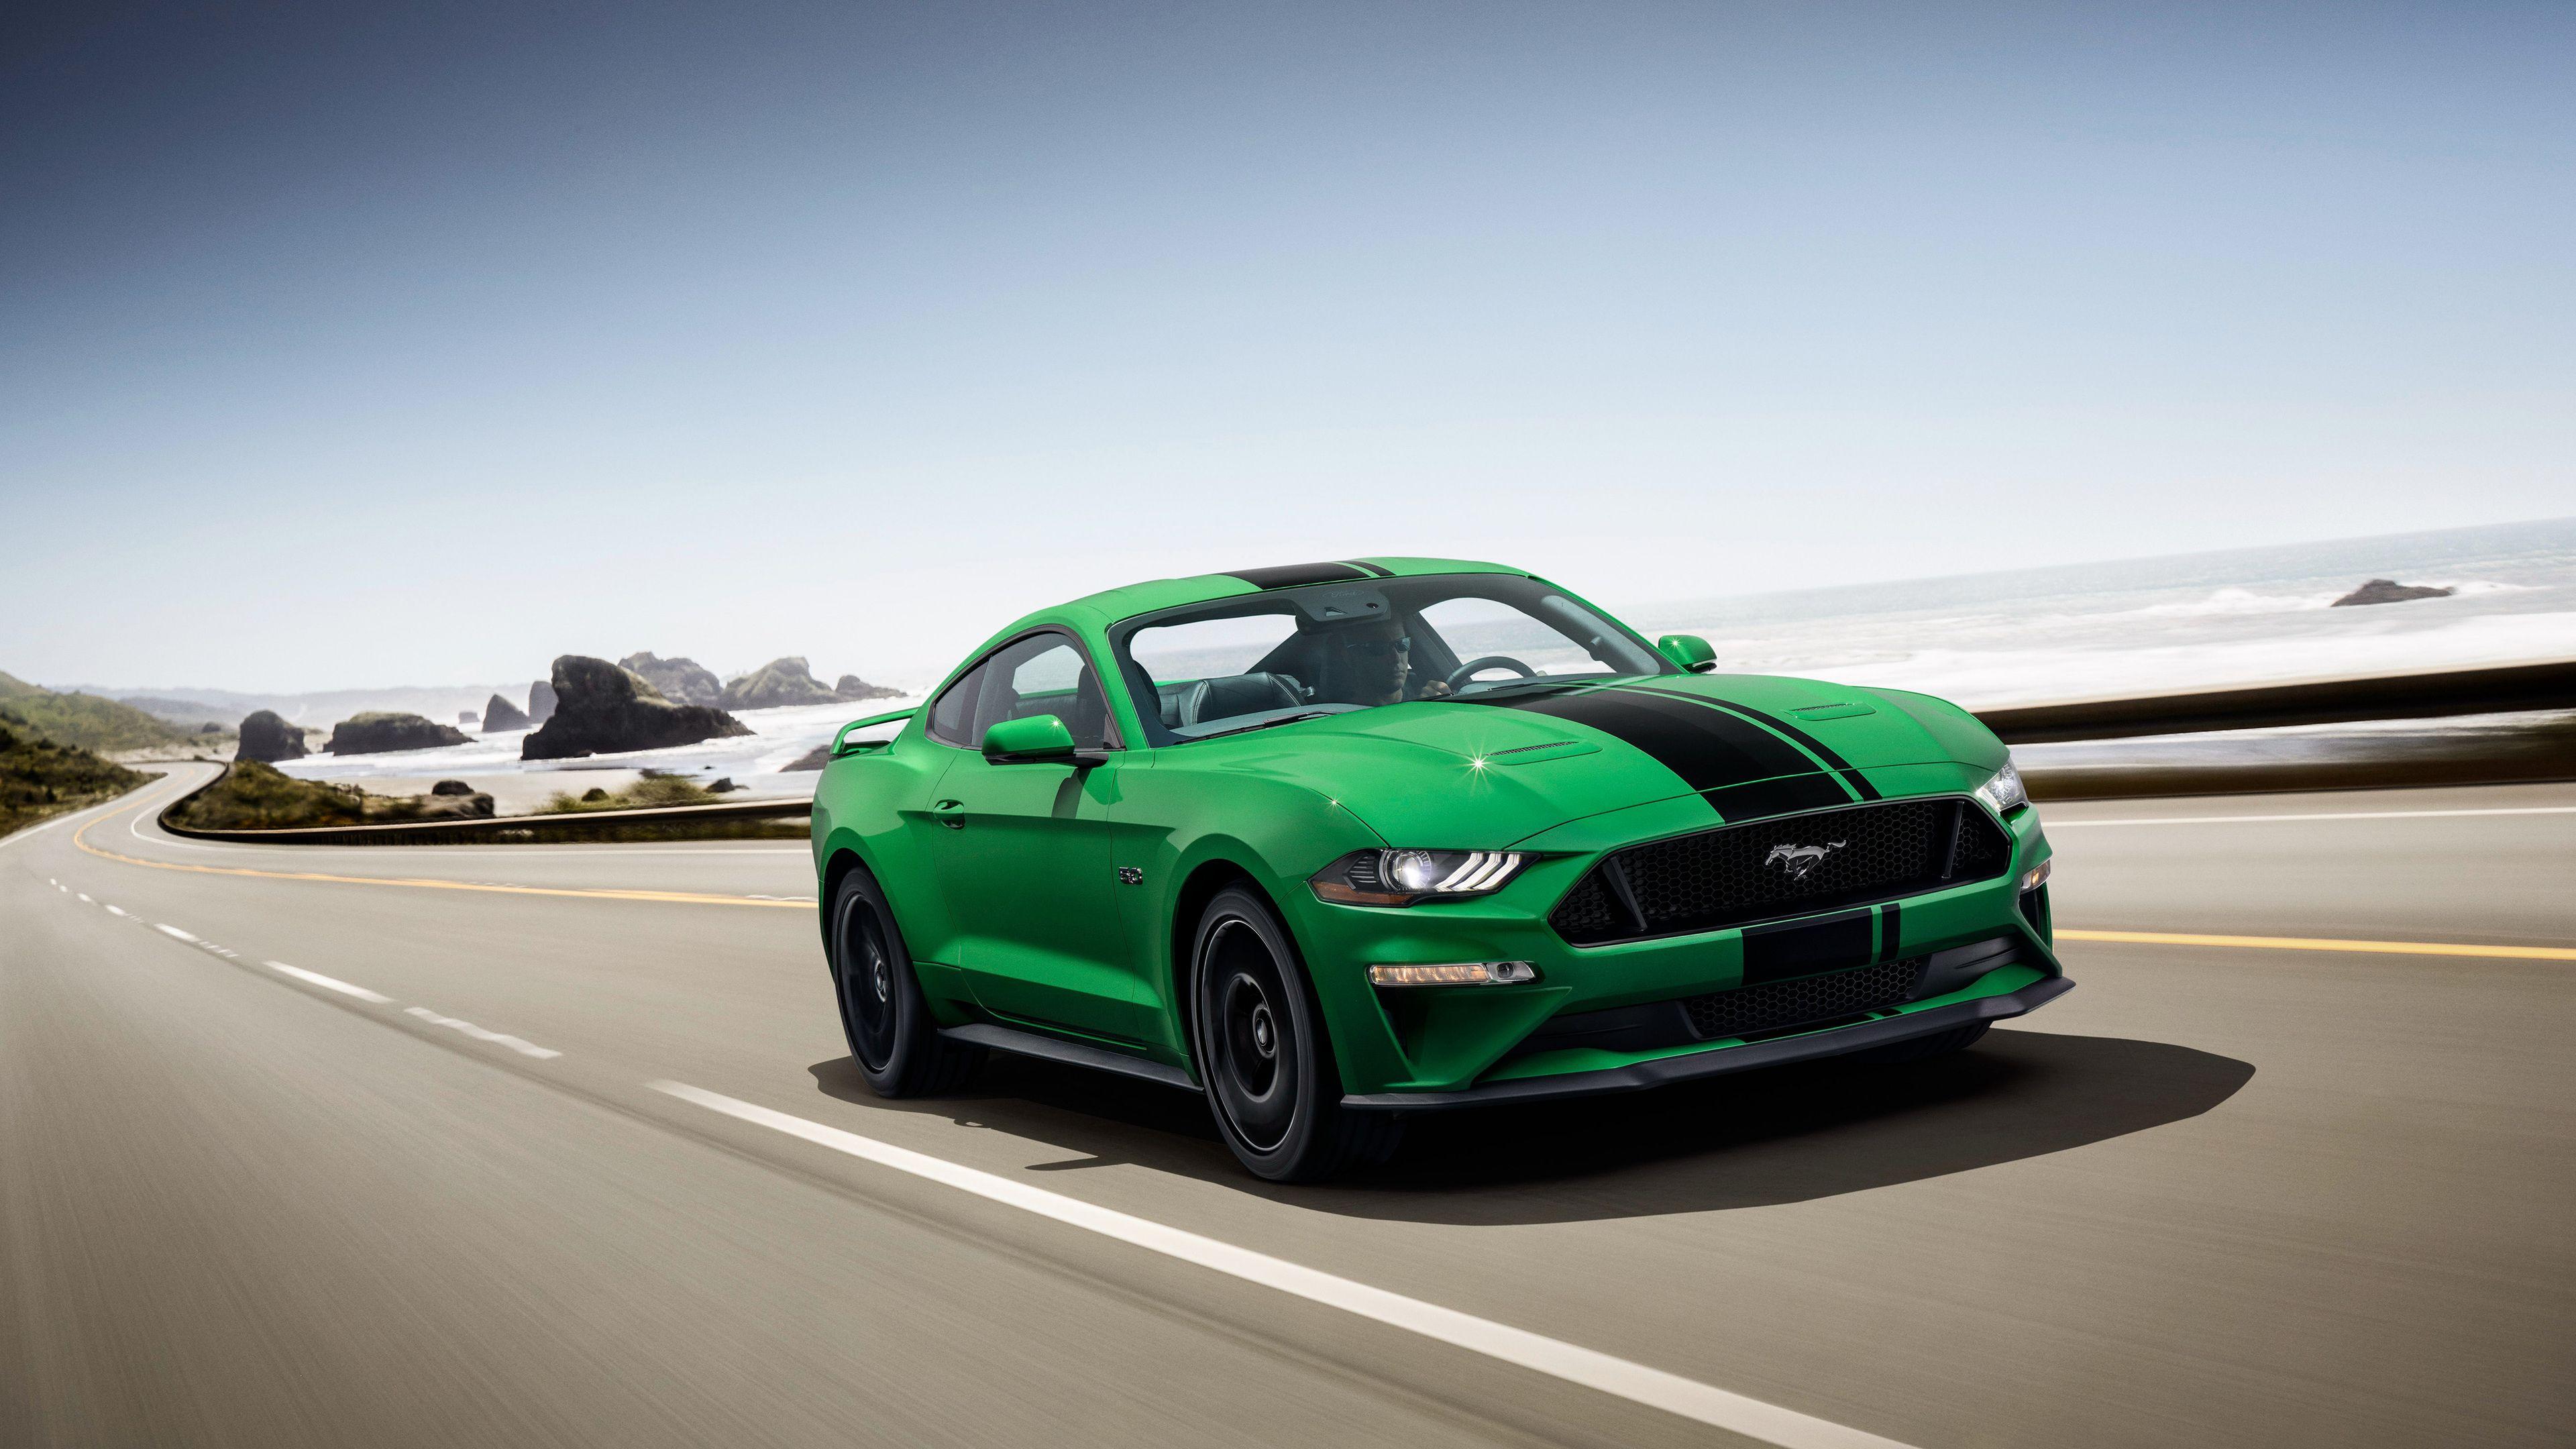 Ford Mustang GT Fastback 2018 mustang wallpapers, hd